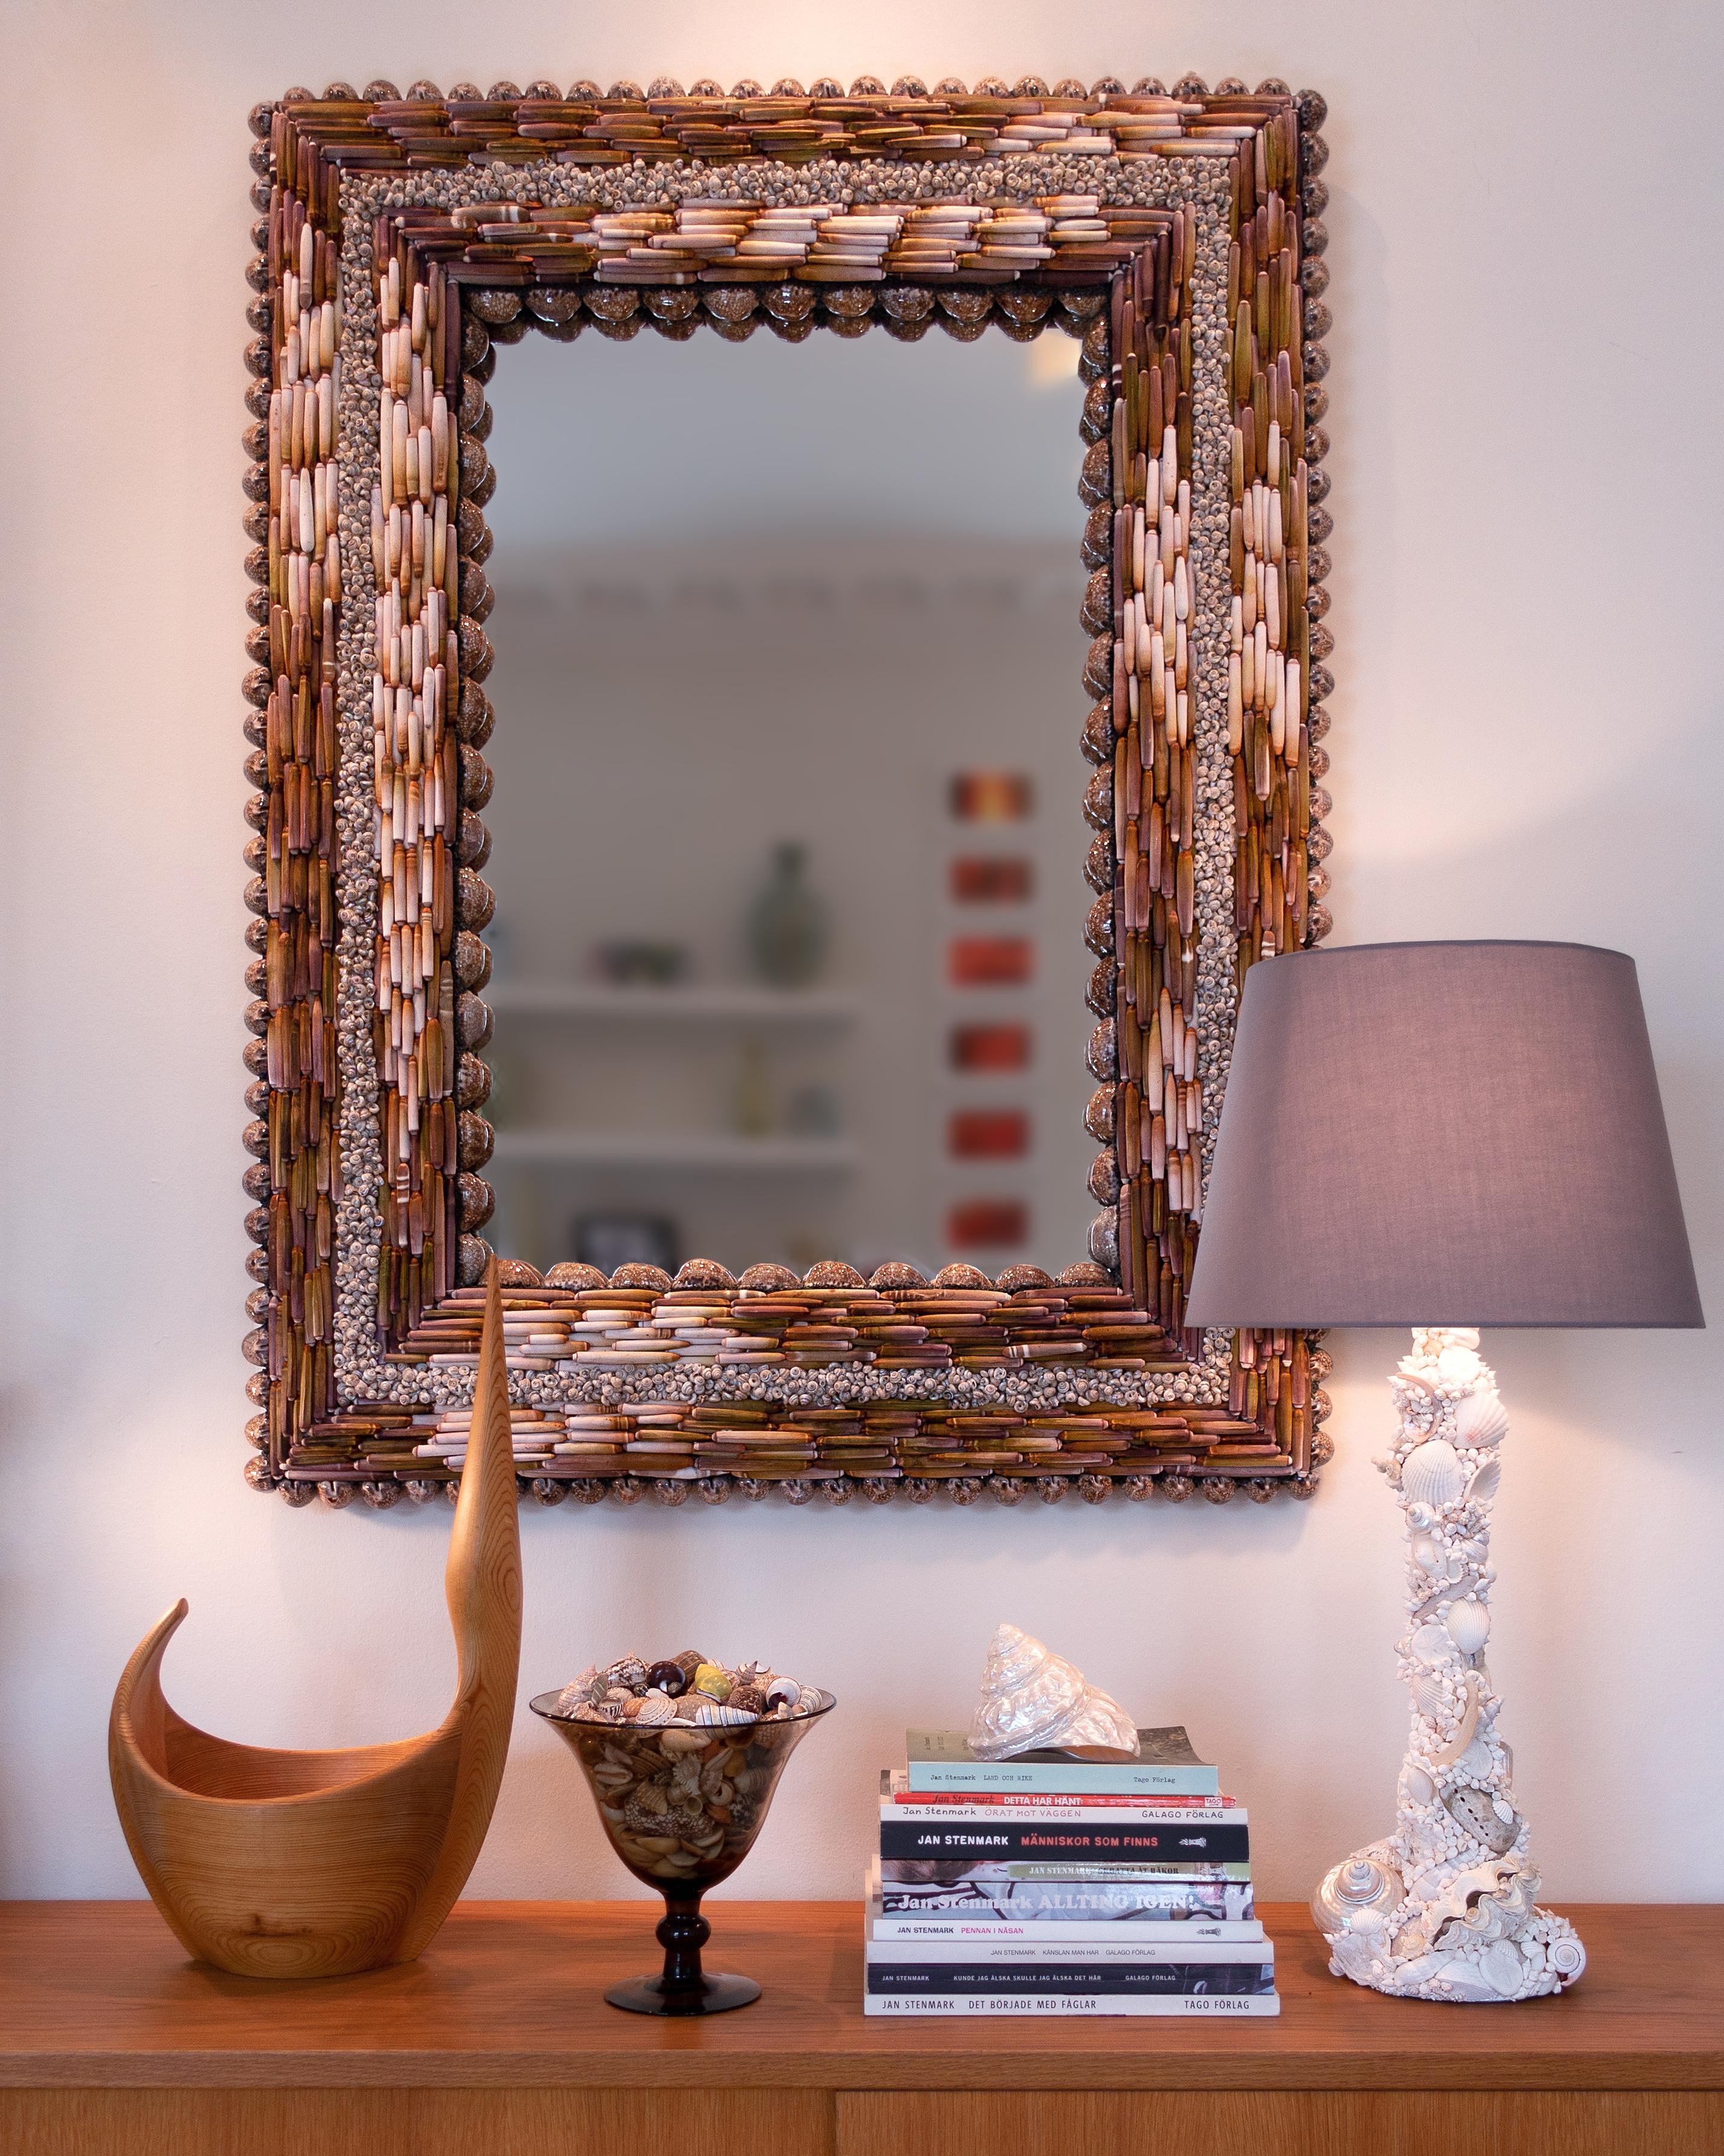 Urchin Pearls, unique shell mirror by Shellman Scandinavia in Sweden.

A strictly patterned shell mirror using only four “ingredients” from sea and beach: shiny Arabic cowries lining both inner and outer edges, urchin spines in beautiful color